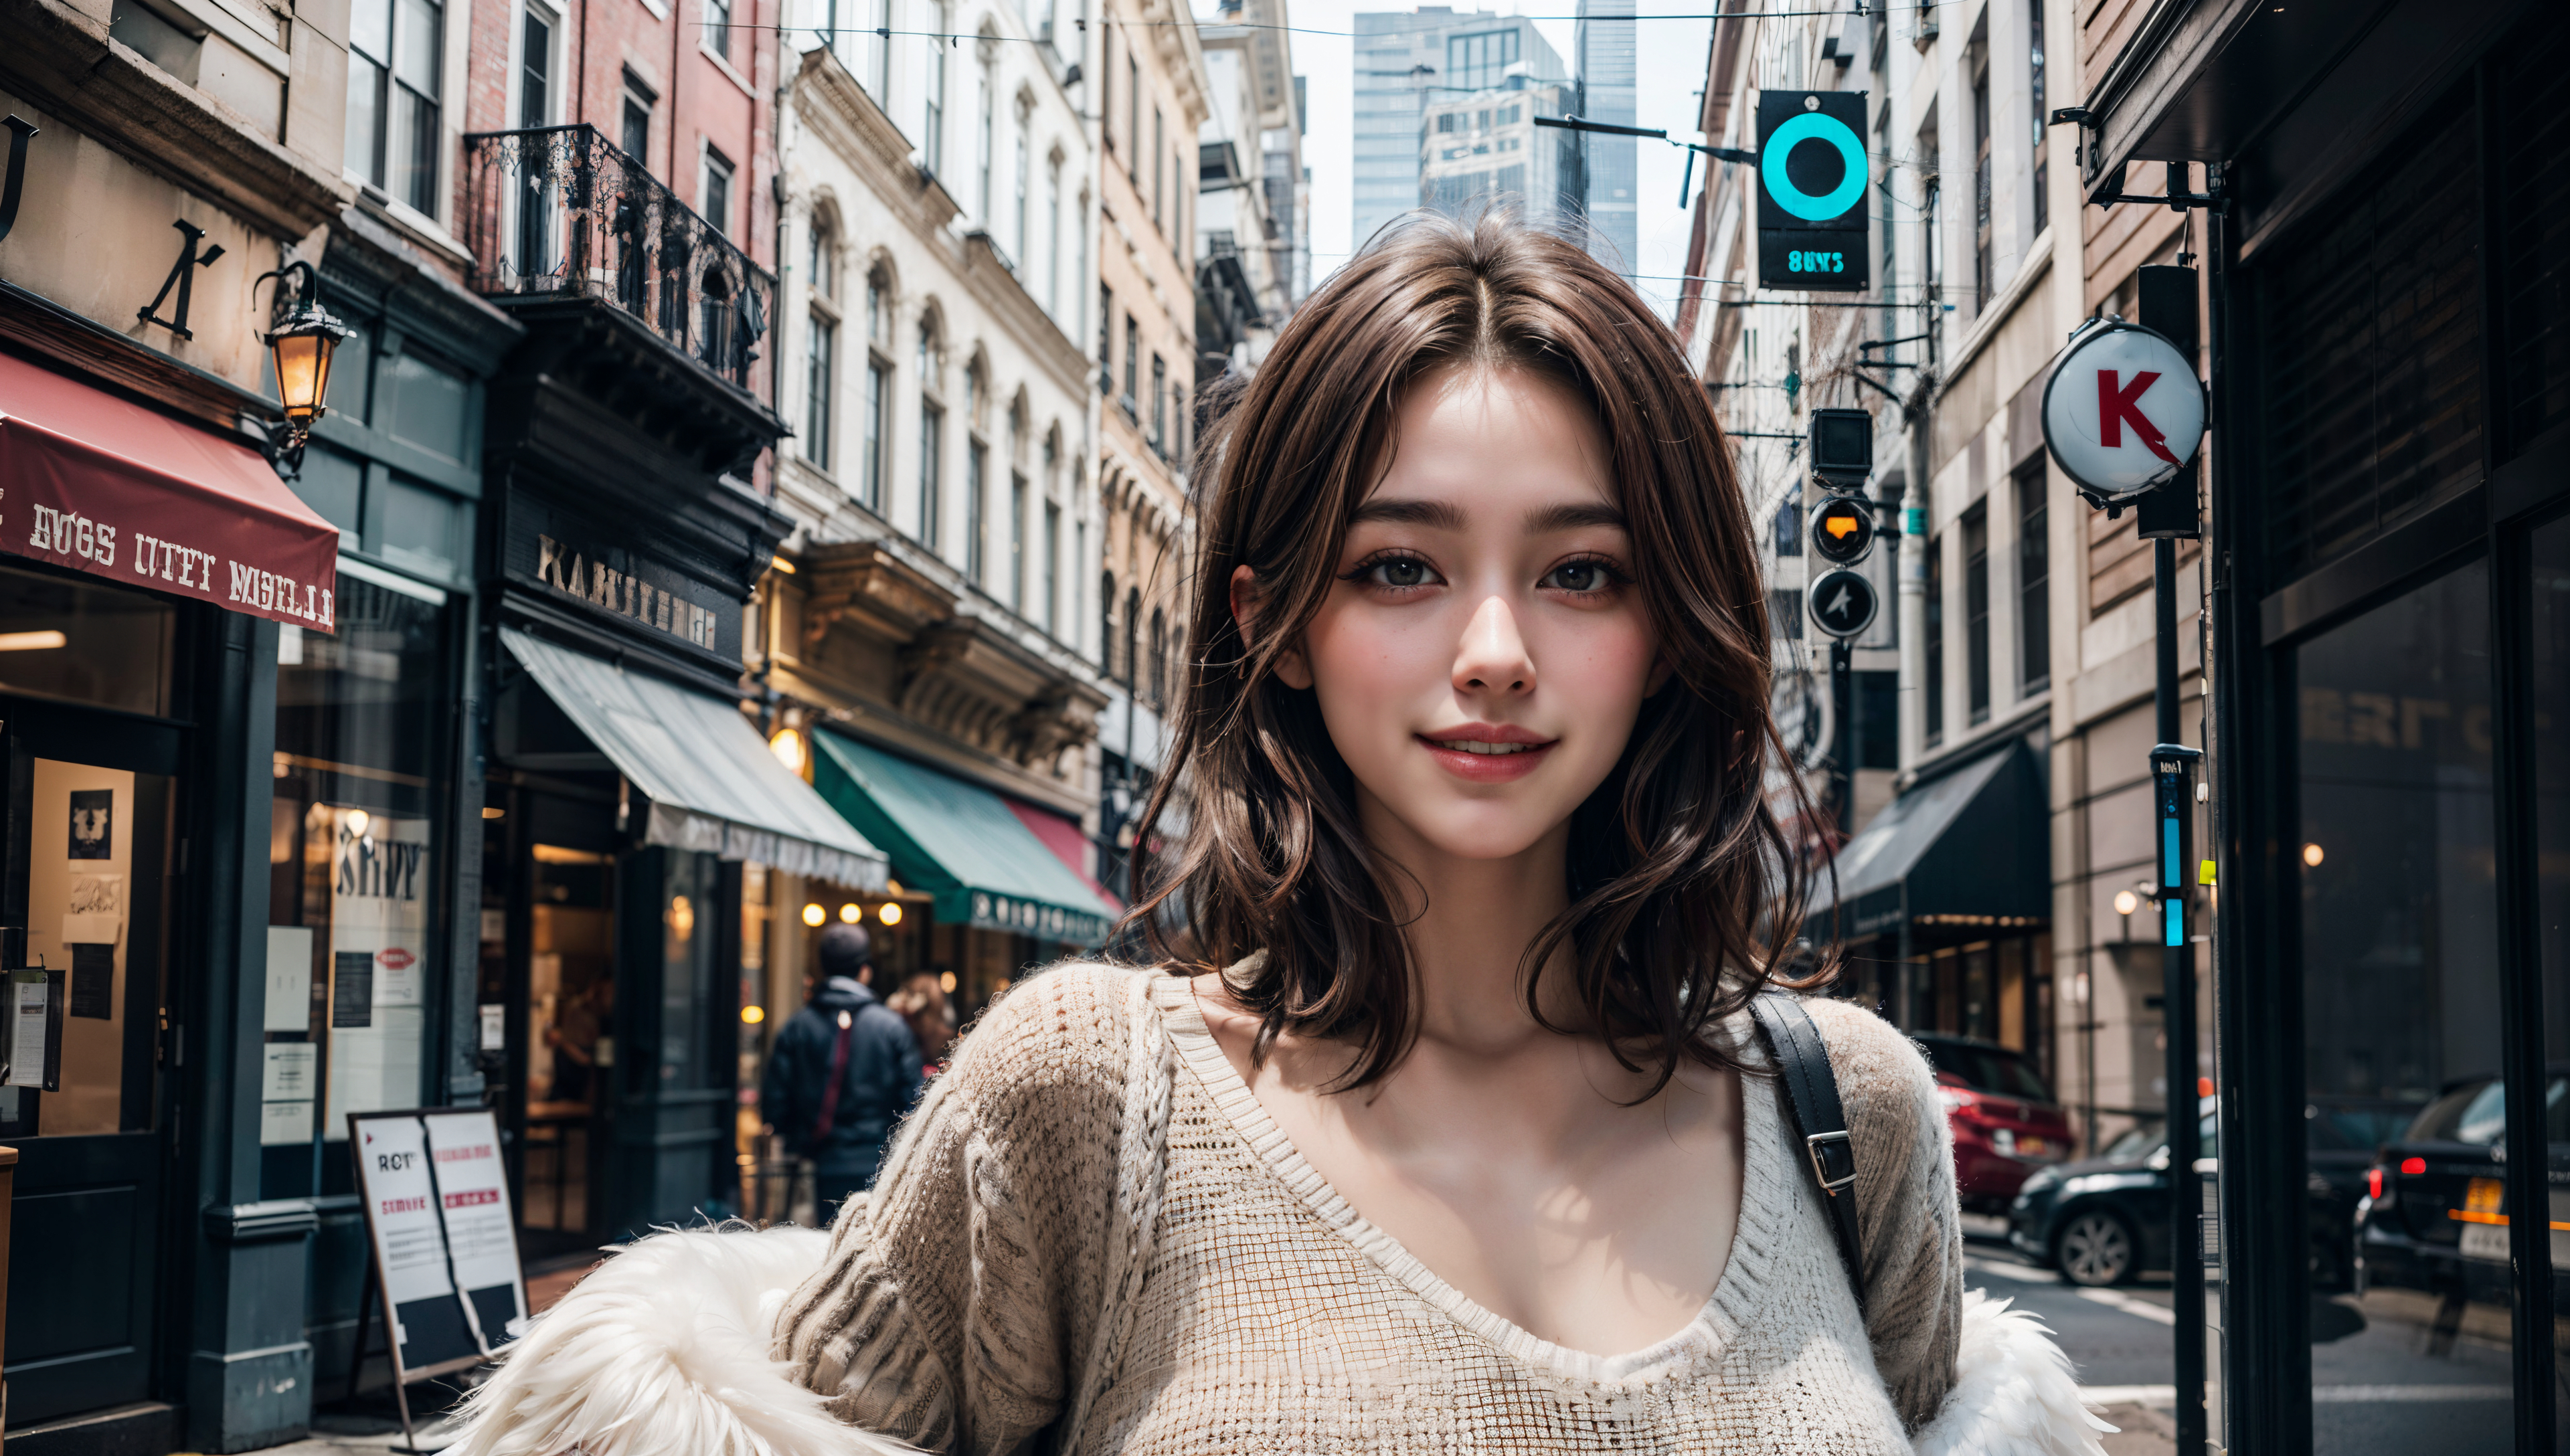 General 3840x2176 AI art women city Asian looking at viewer long hair building street light store front smiling street